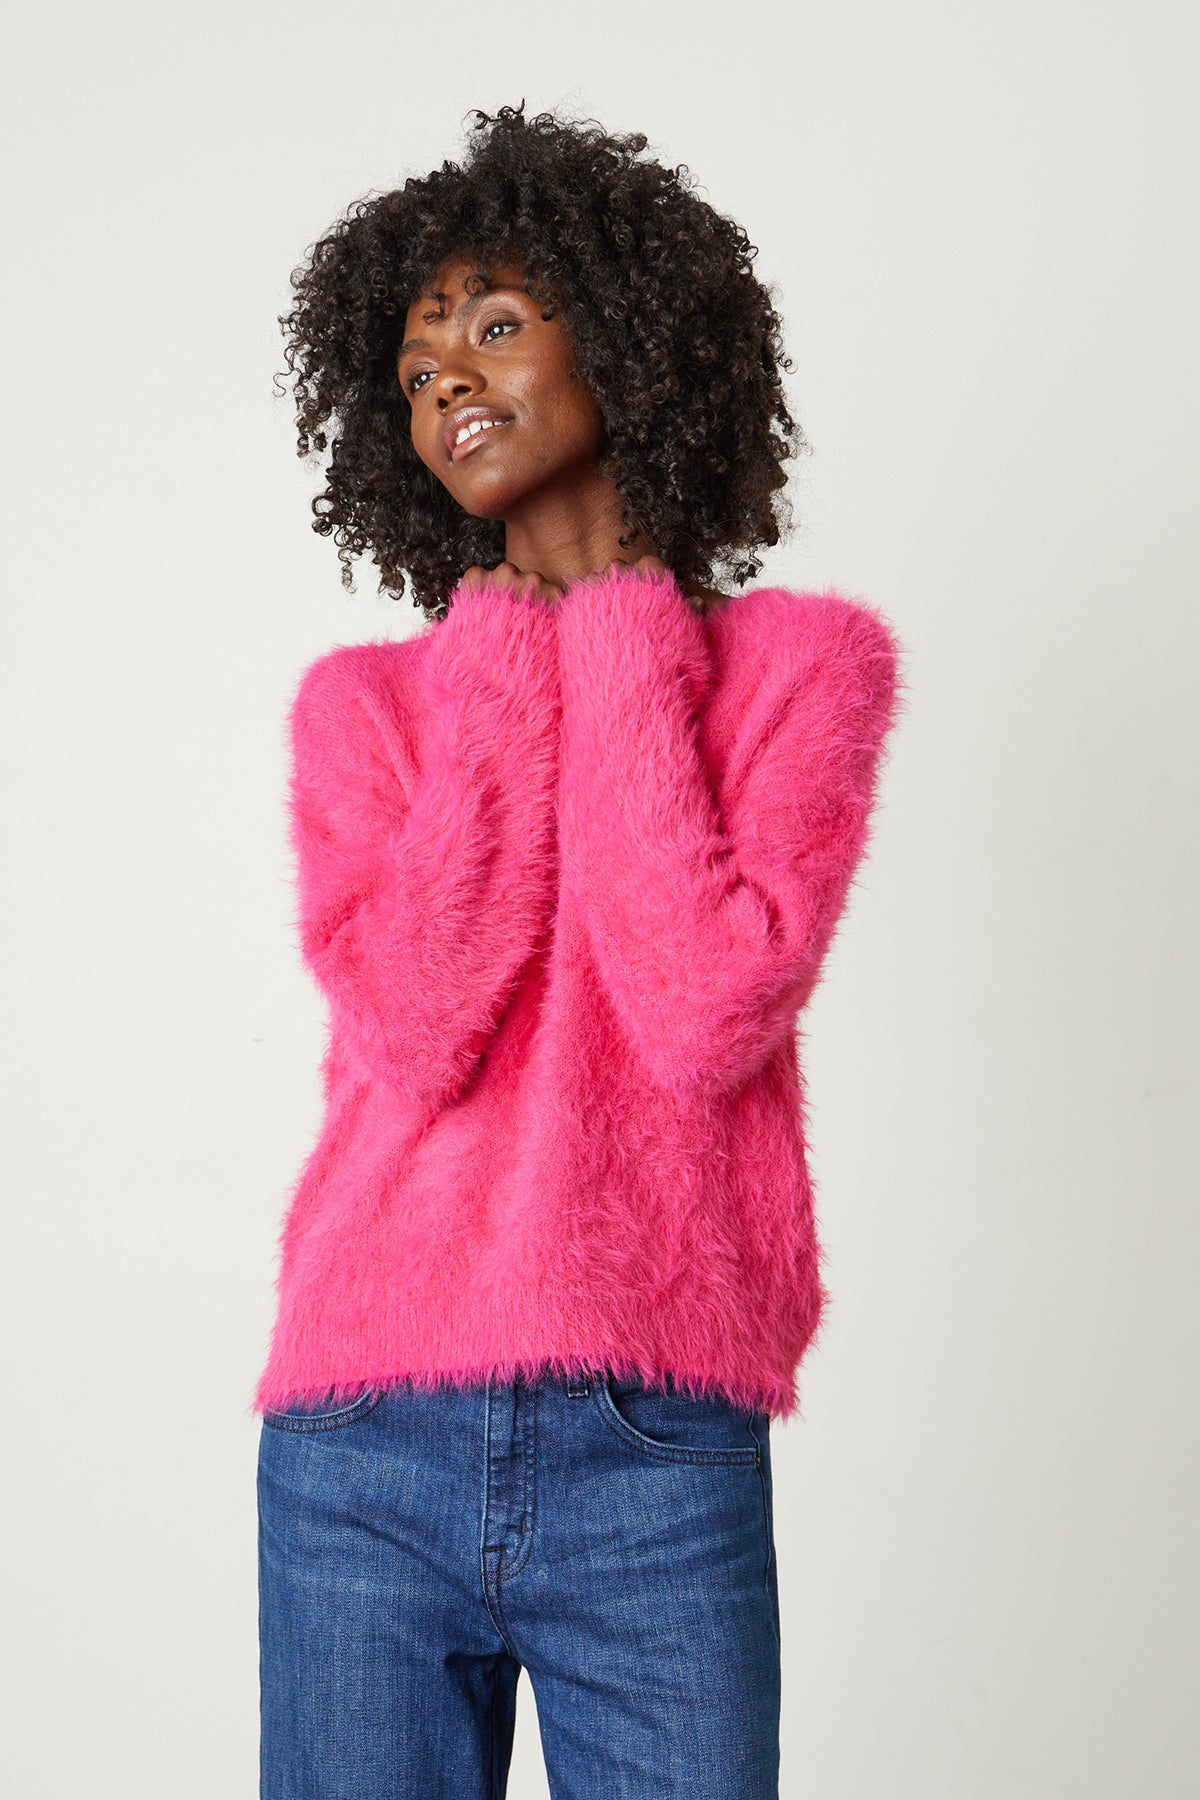 Ray Feather Yarn Crew Neck Sweater in hot pink model standing with hands near chin.-25444377395393